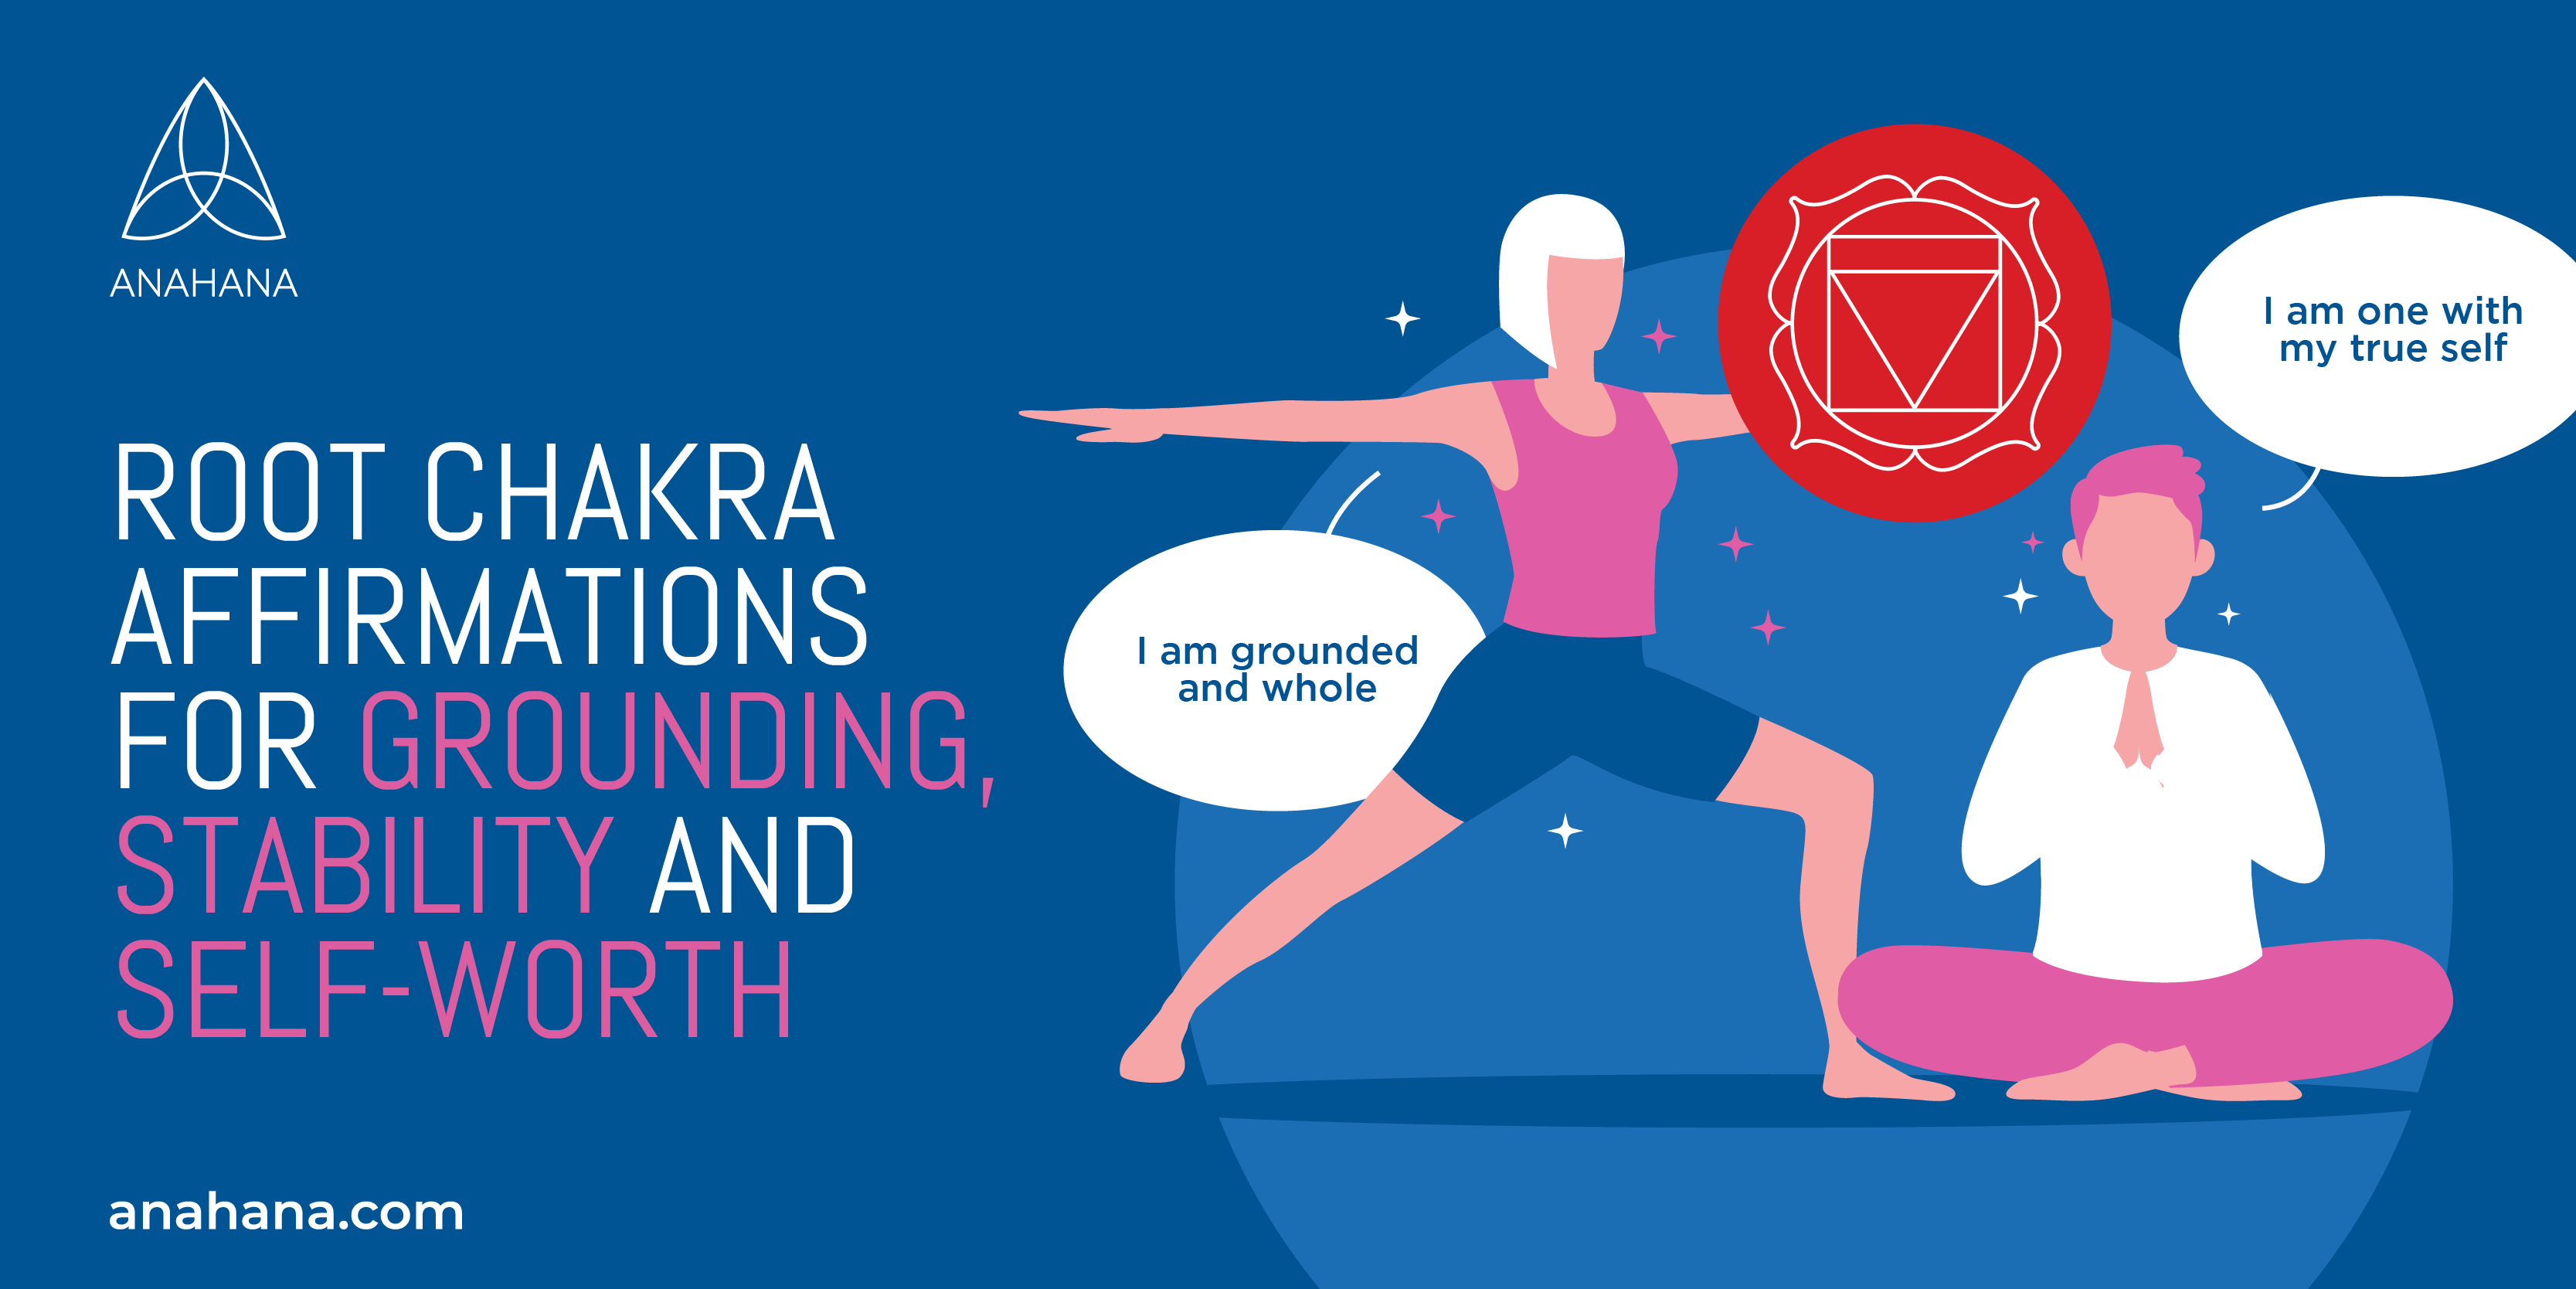 root chakra affirmations explained